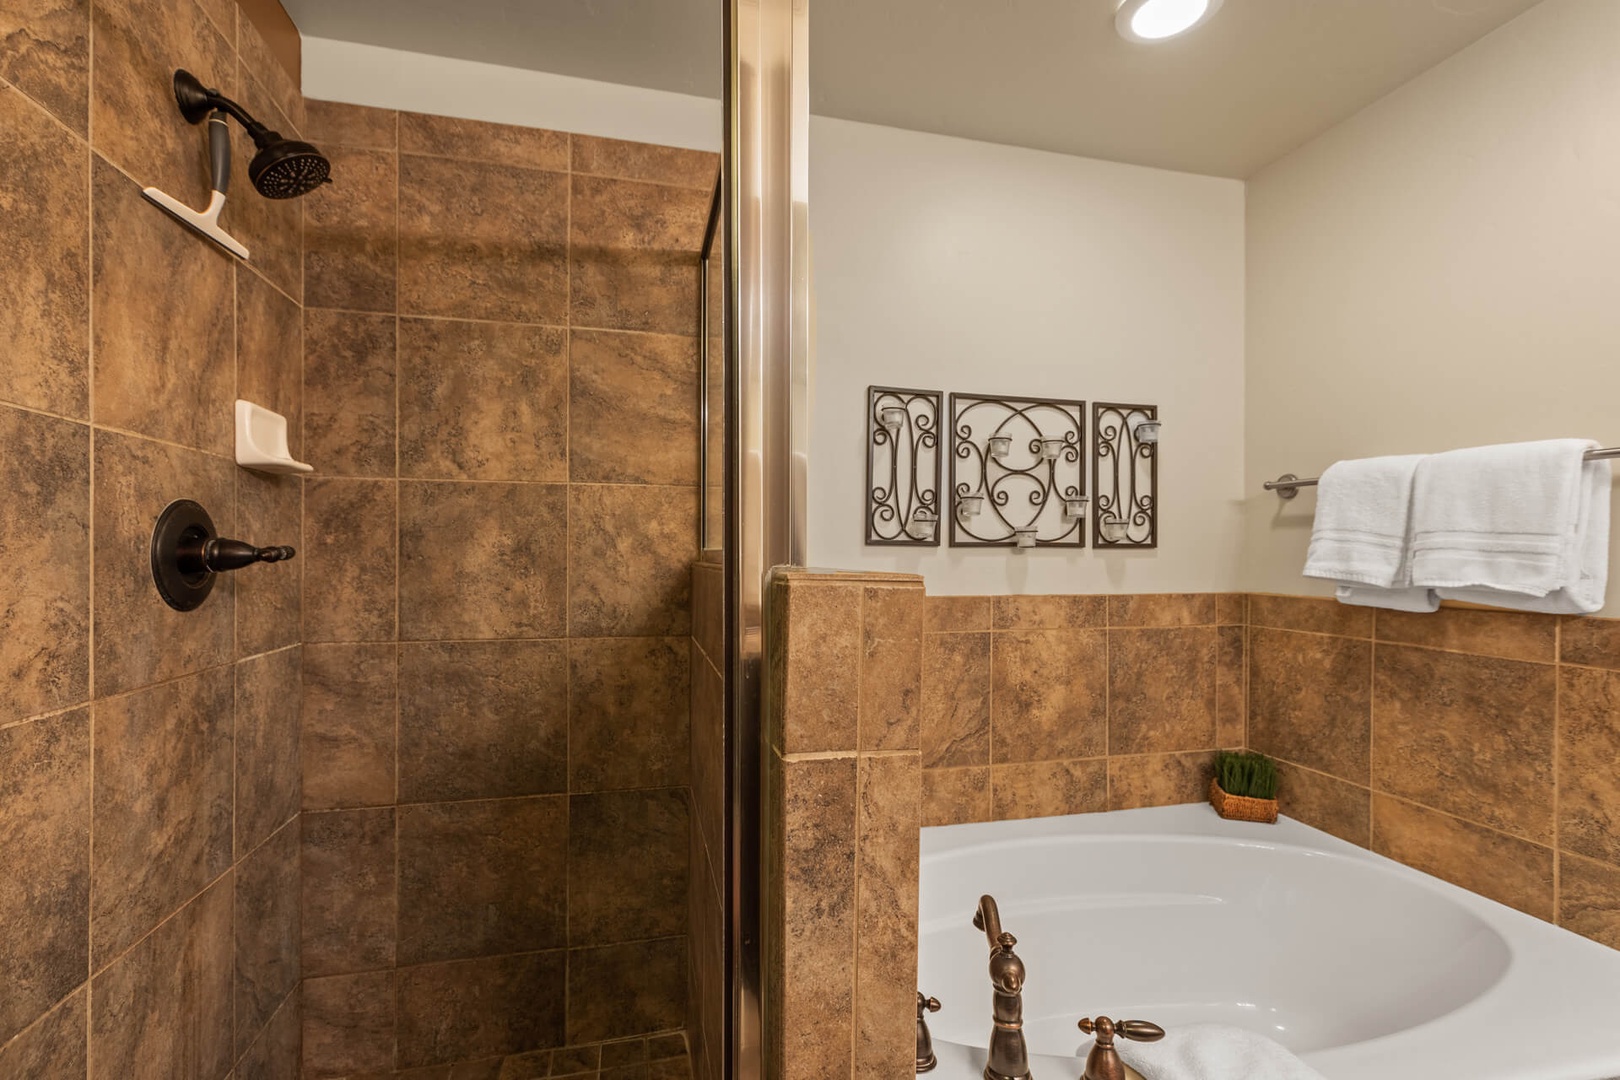 Bear Hollow Lodges 1304:  The beautifully appointed Master Bath has a deep oval tub and walk-in shower.